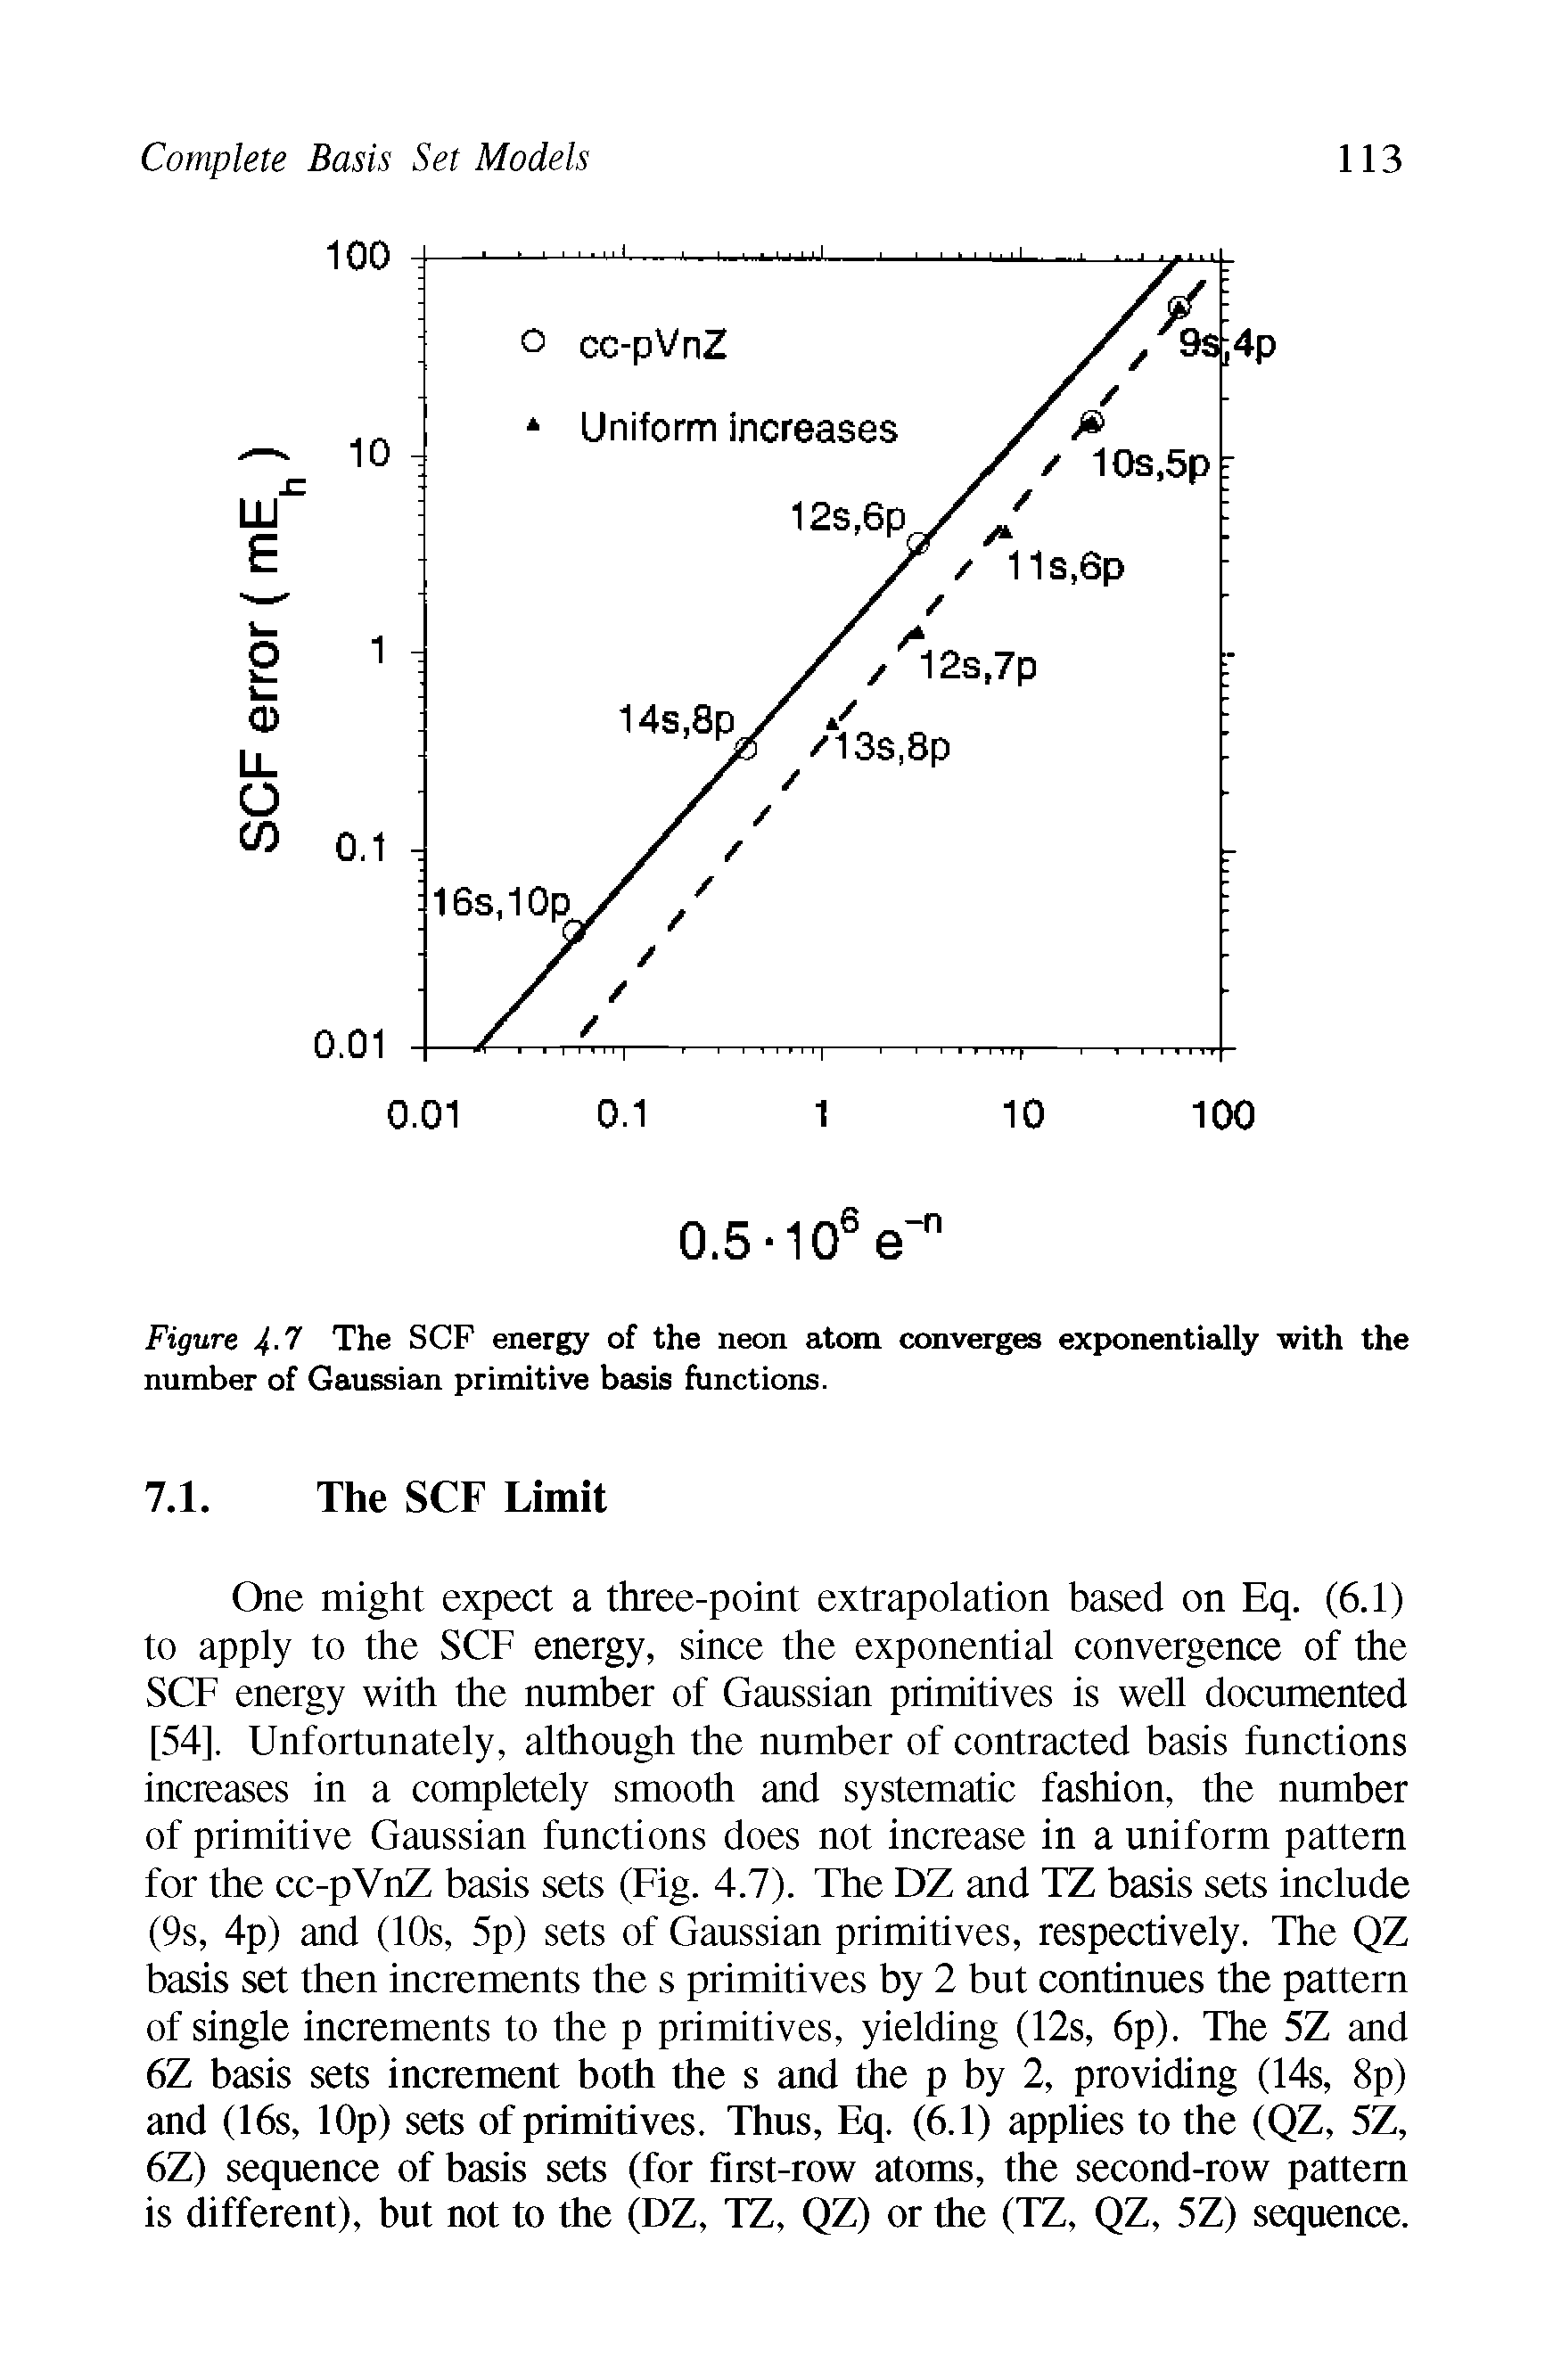 Figure 4-7 The SCF energy of the neon atom converges exponentially with the number of Gaussian primitive basis functions.